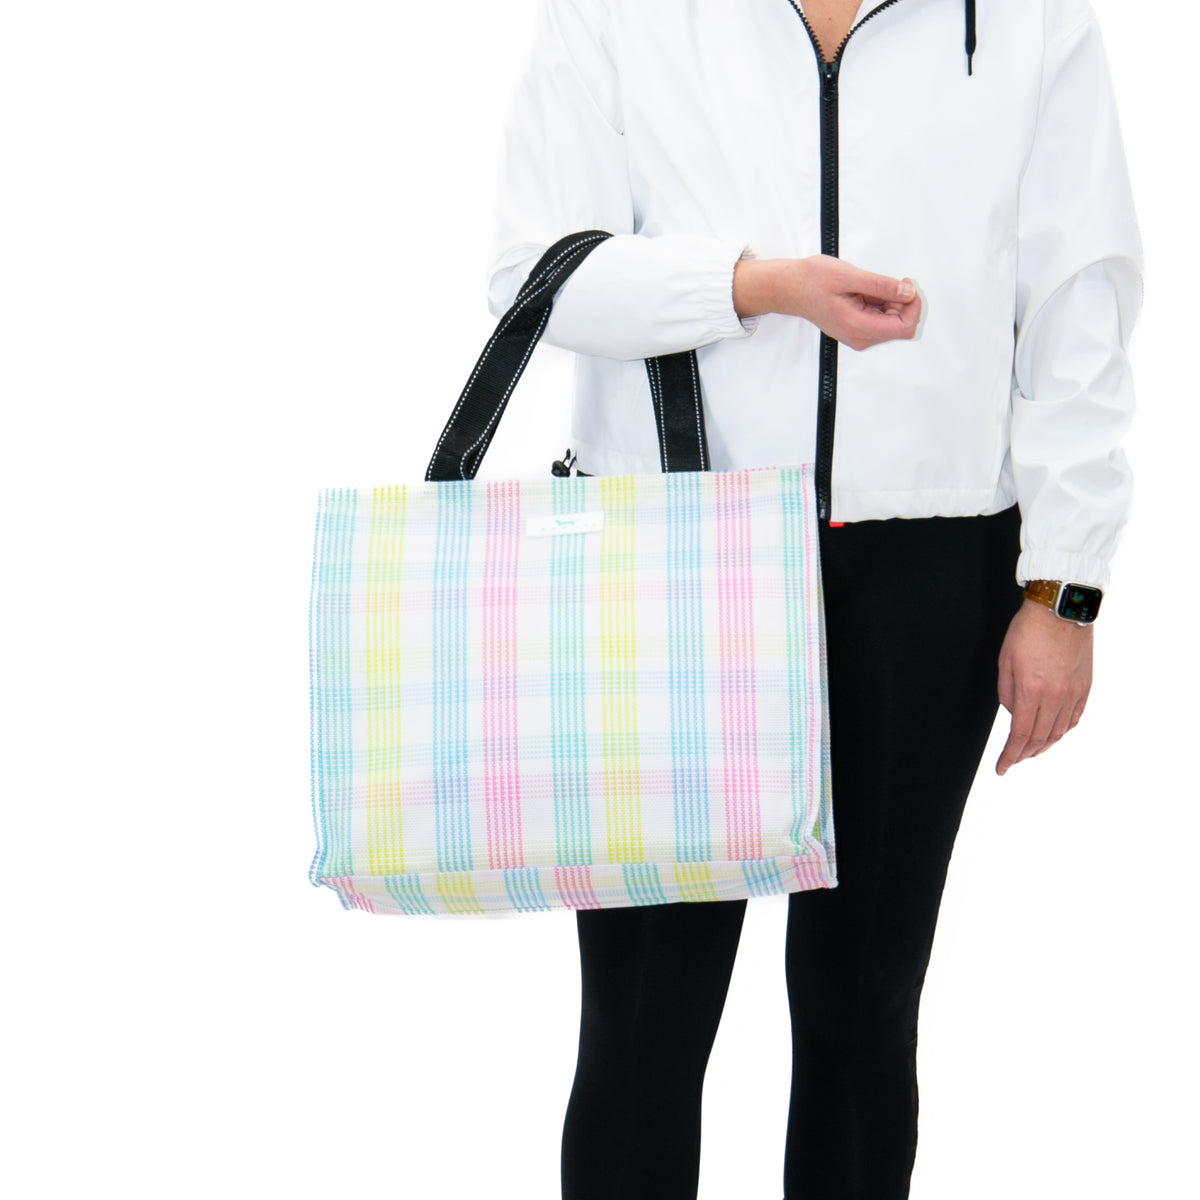 2-in-1 Mesh Beach Tote Bag with Detachable Cooler Bag